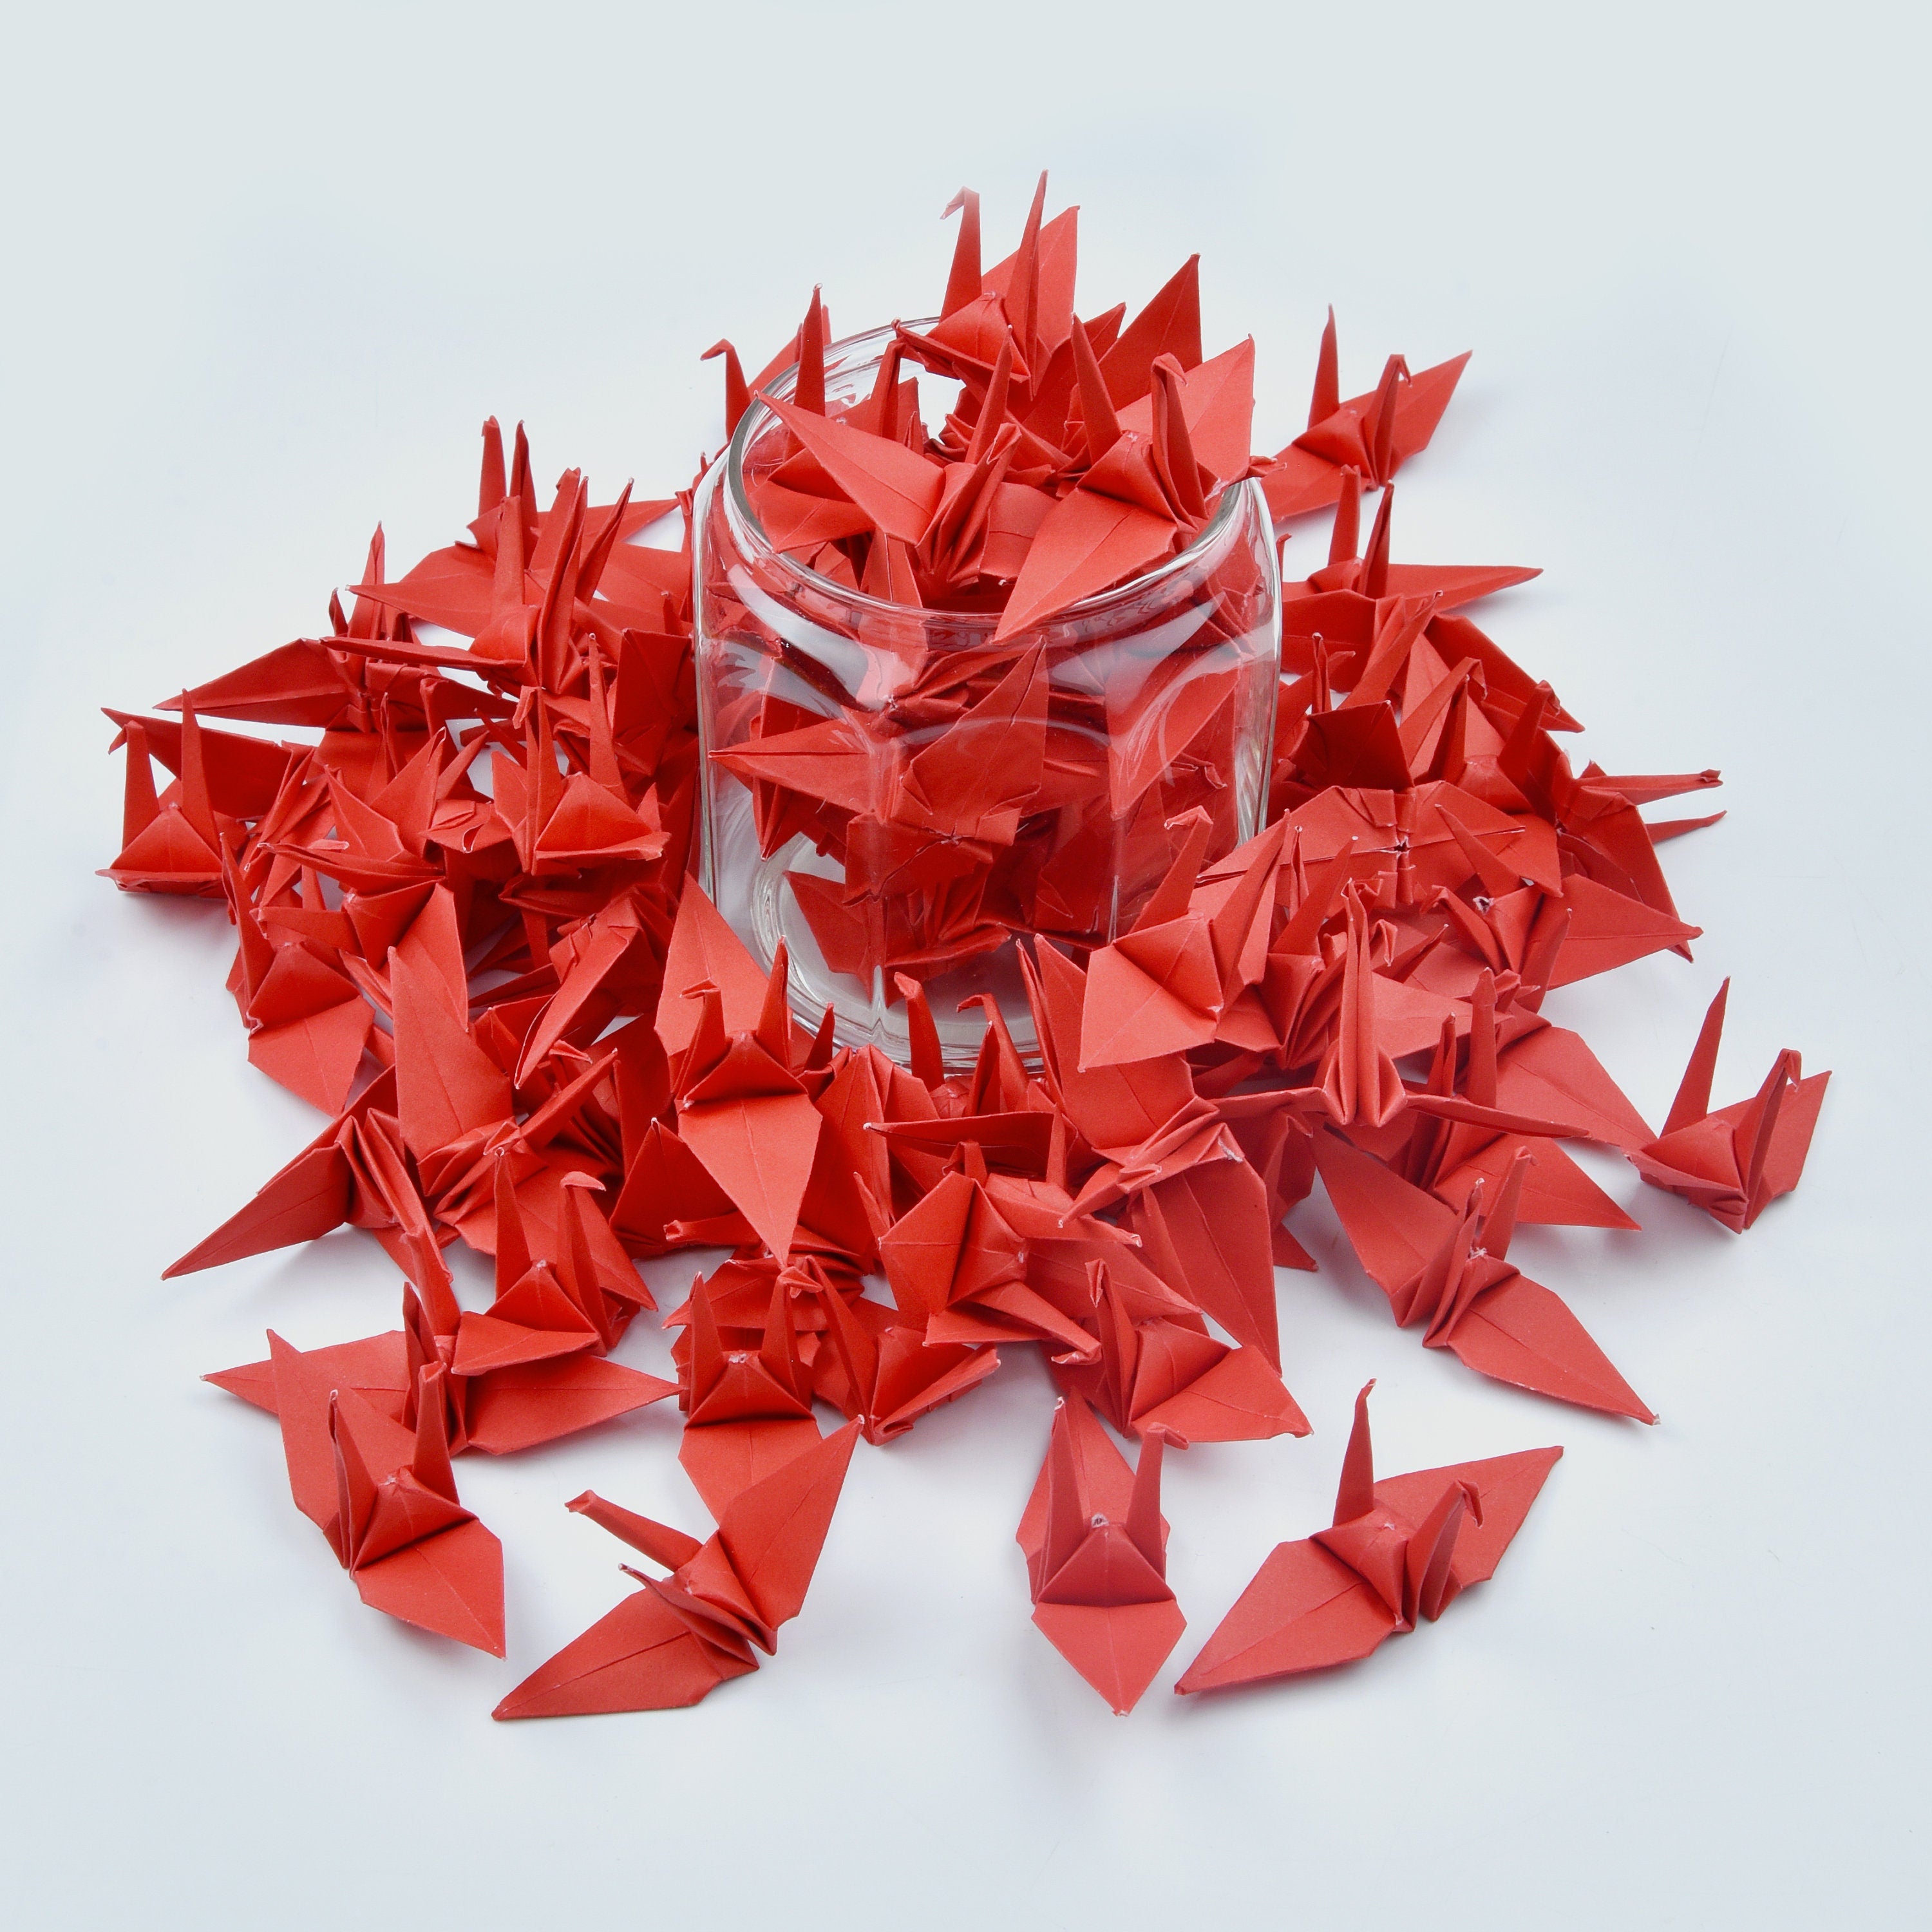 1000 Origami Paper Crane Red 3x3 inches Handmade Folding